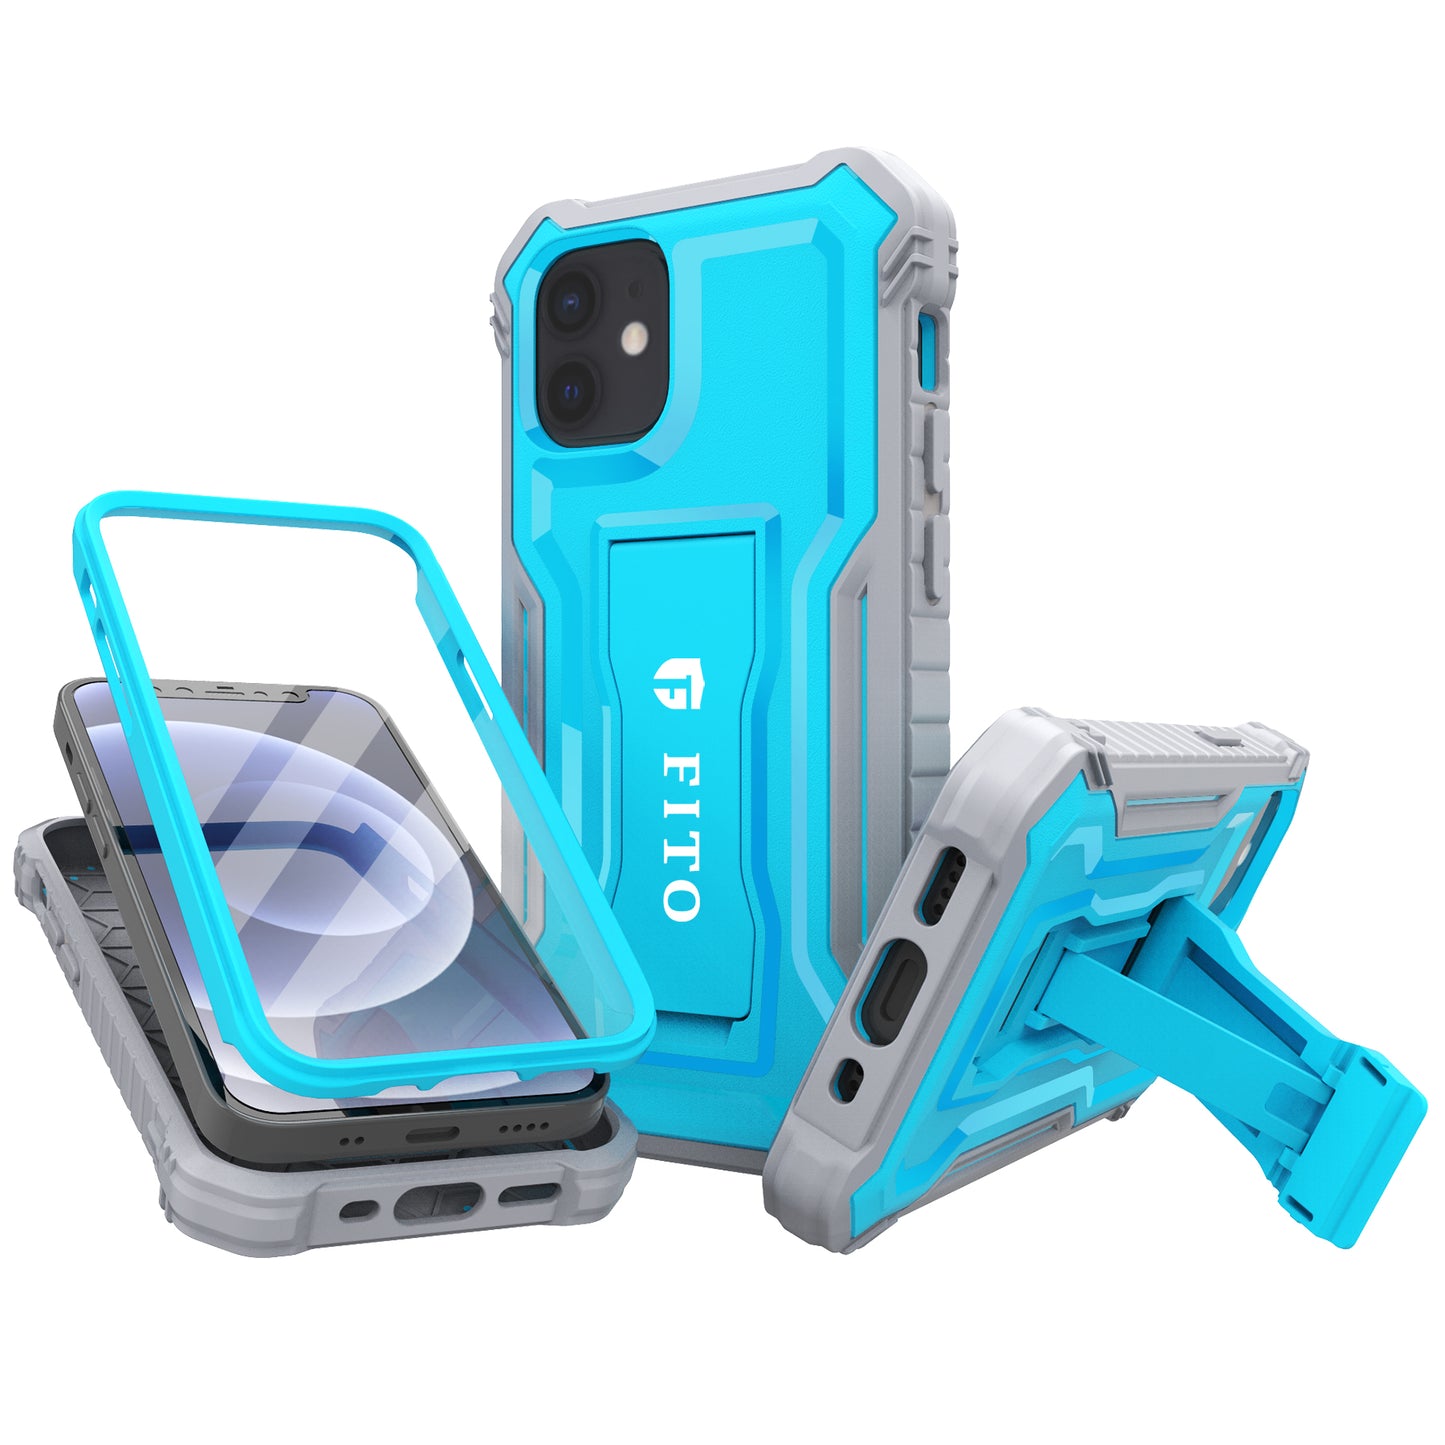 FITO for iPhone 12 Mini Case Built-in Screen Protector, Dual Layer Shockproof Heavy Duty Case with Kickstand Compatible with iPhone 12 Mini 5.4 inch Phone